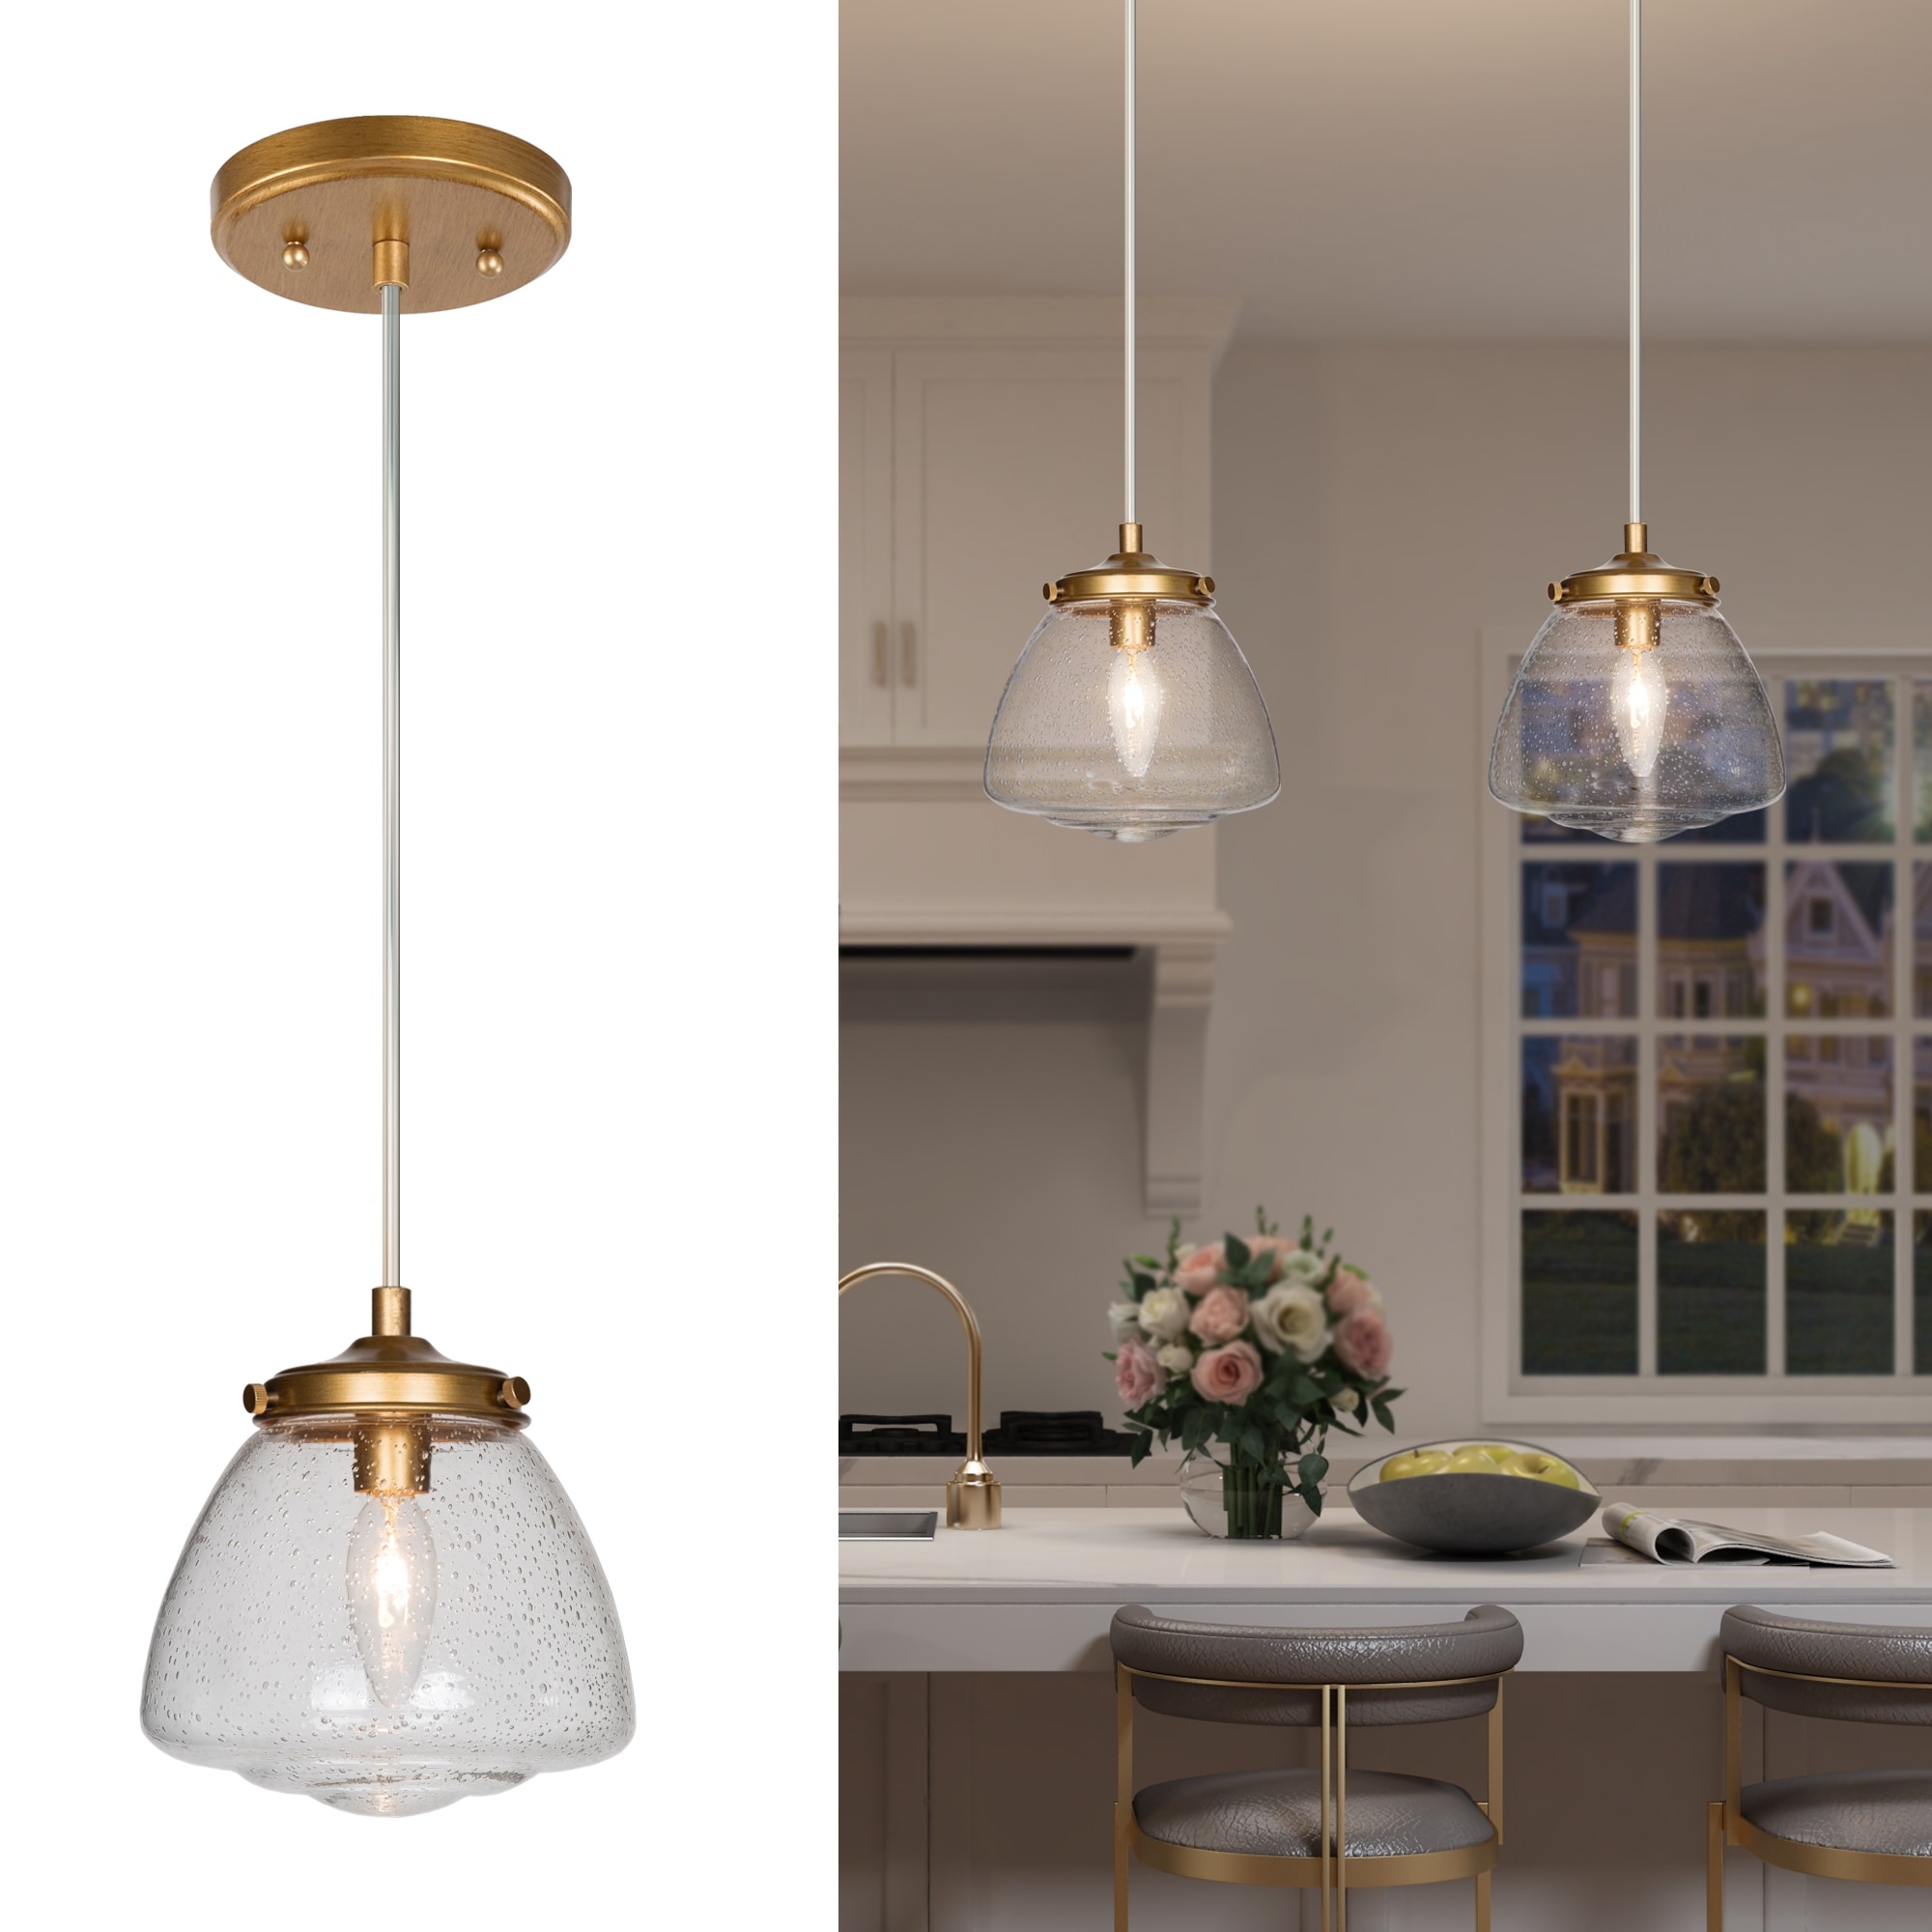 Easy Fit Modern Retro Metal Ceiling Pendant Light Shade Kitchen Island Dining 